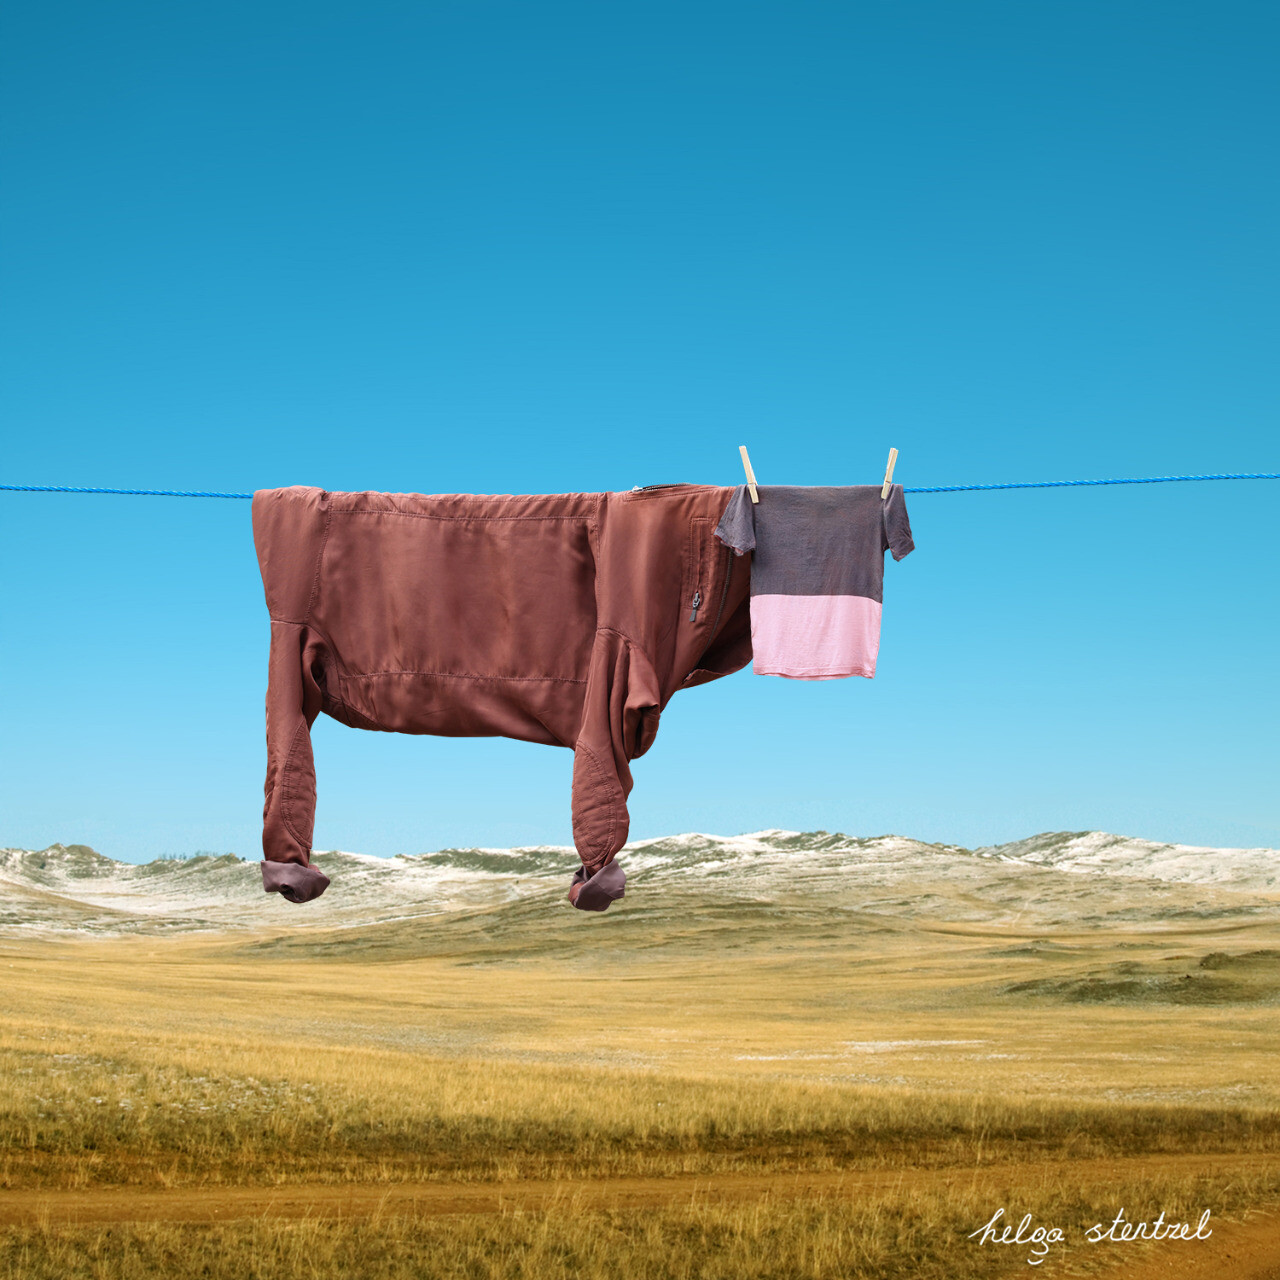 Photography Humor Helga Stentzel Landscape Nature Animals Cow Illusion Cloth Clothes Field 1280x1280